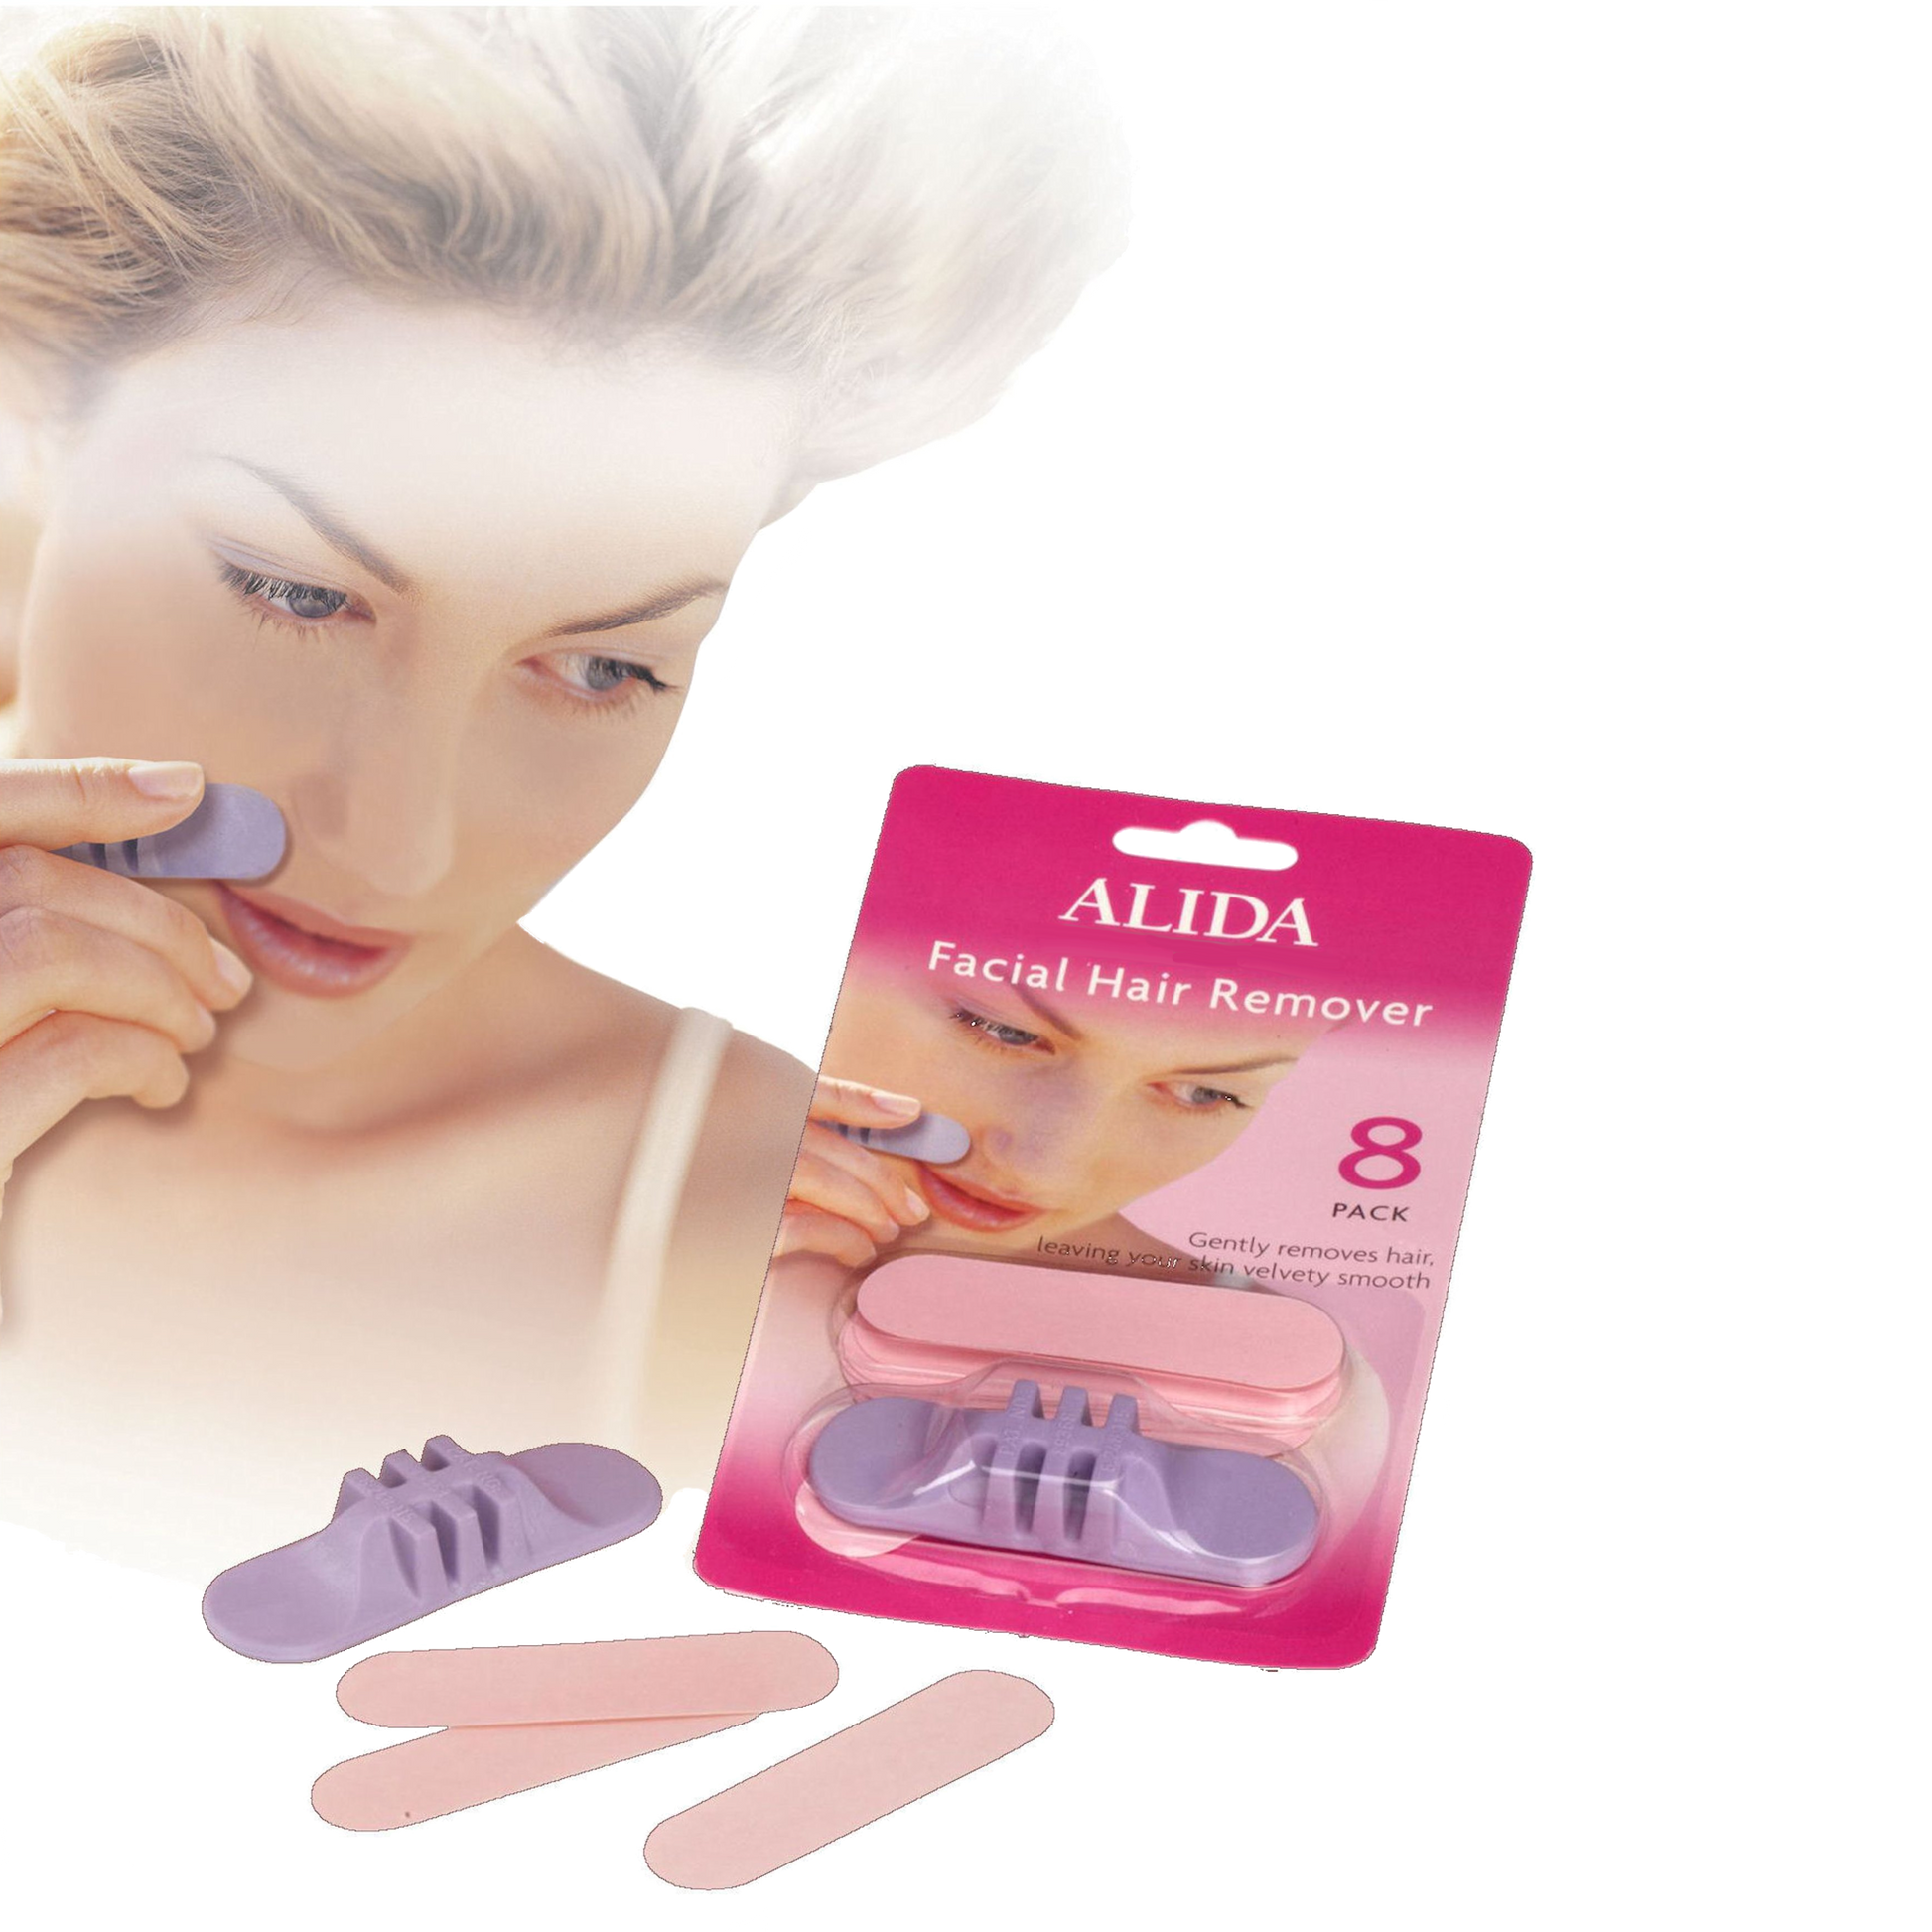 Alida Facial Har Remover from Alida.co.uk Gently removes hair leaving your skin silky smooth